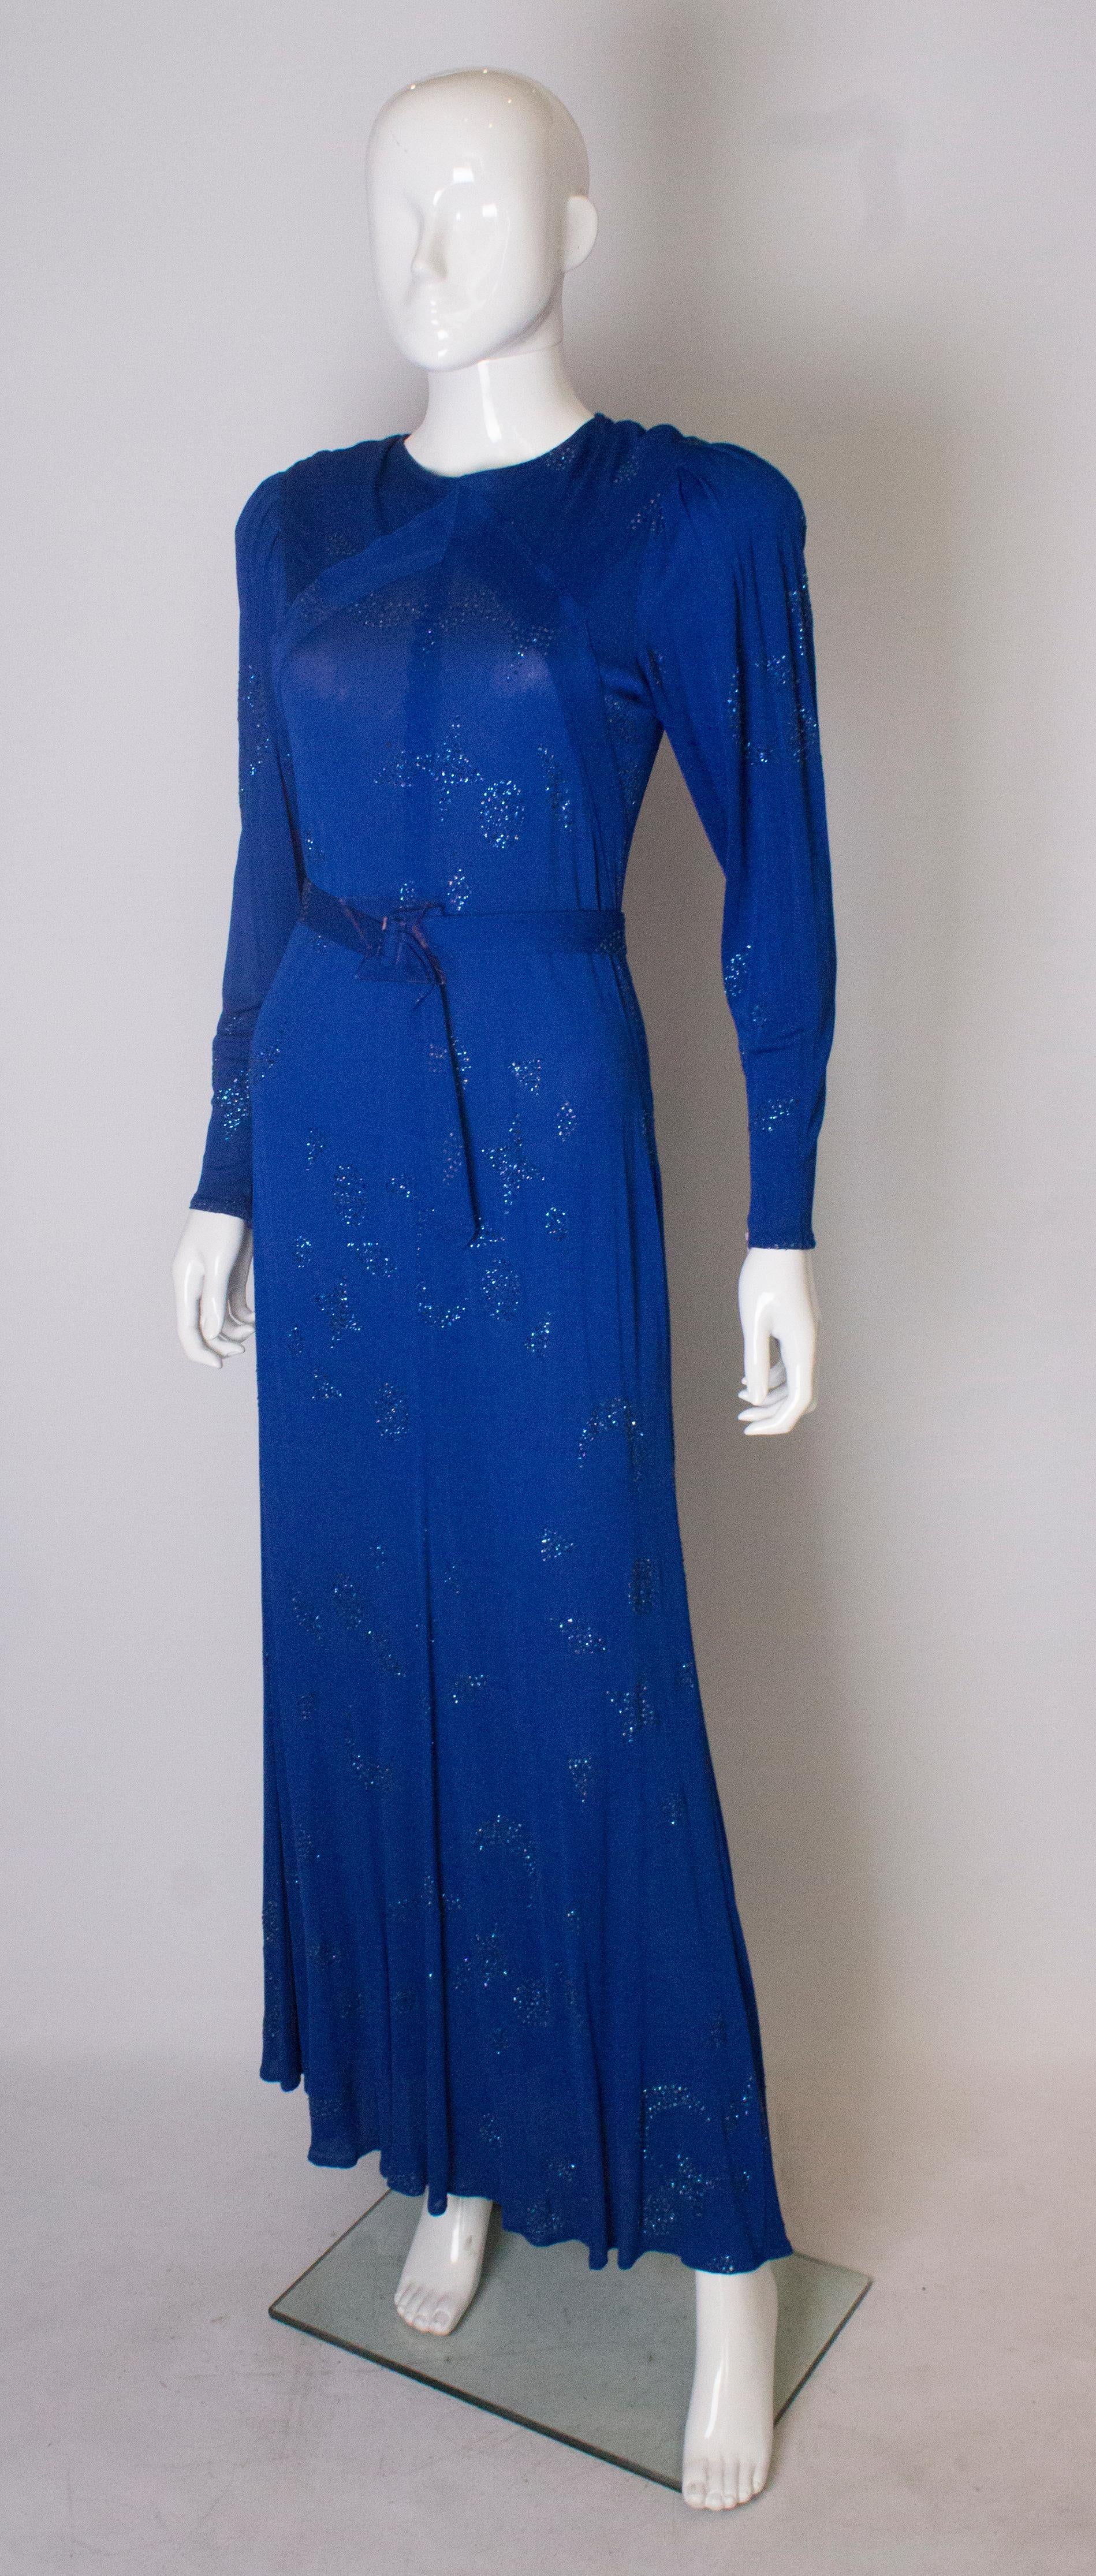 Blue A vintage 1970s electric blue and beaded evening gown by Jean Muir 